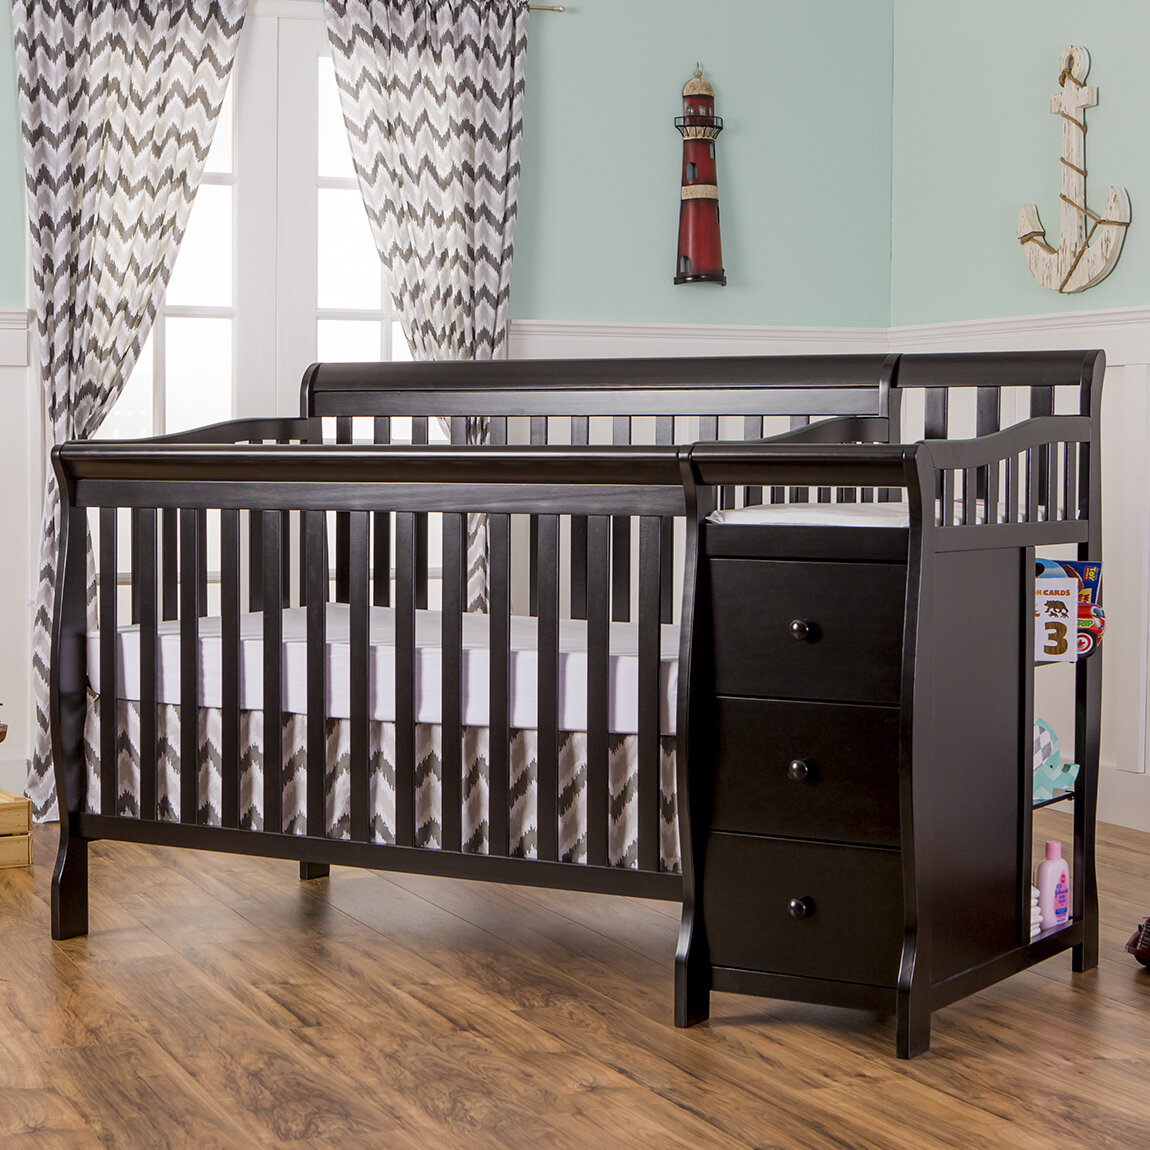 Dream On Me Brody 3 In 1 Convertible Crib And Changer Reviews Wayfair